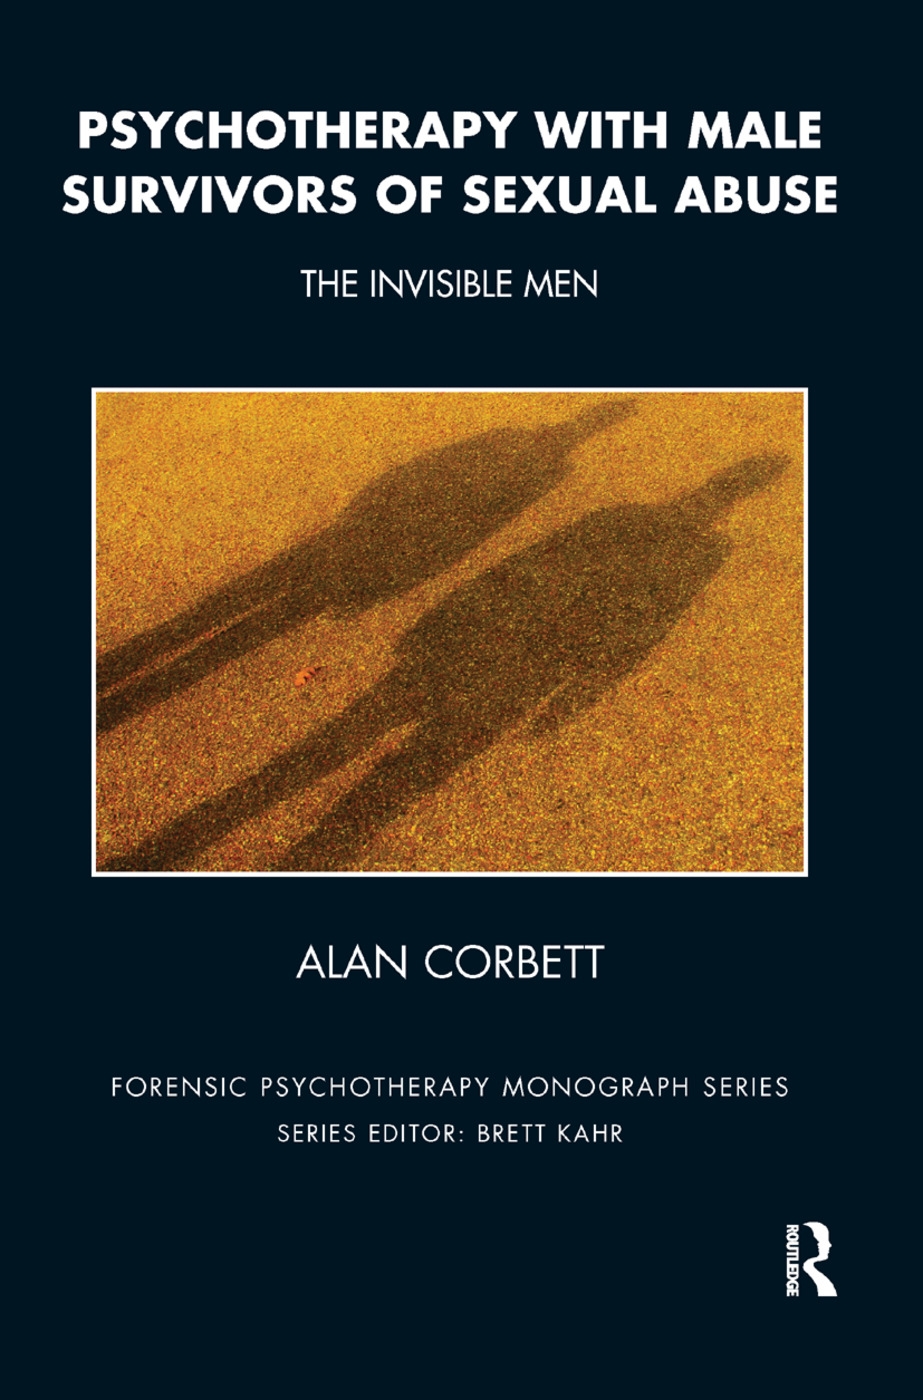 Psychotherapy with Male Survivors of Sexual Abuse: The Invisible Men